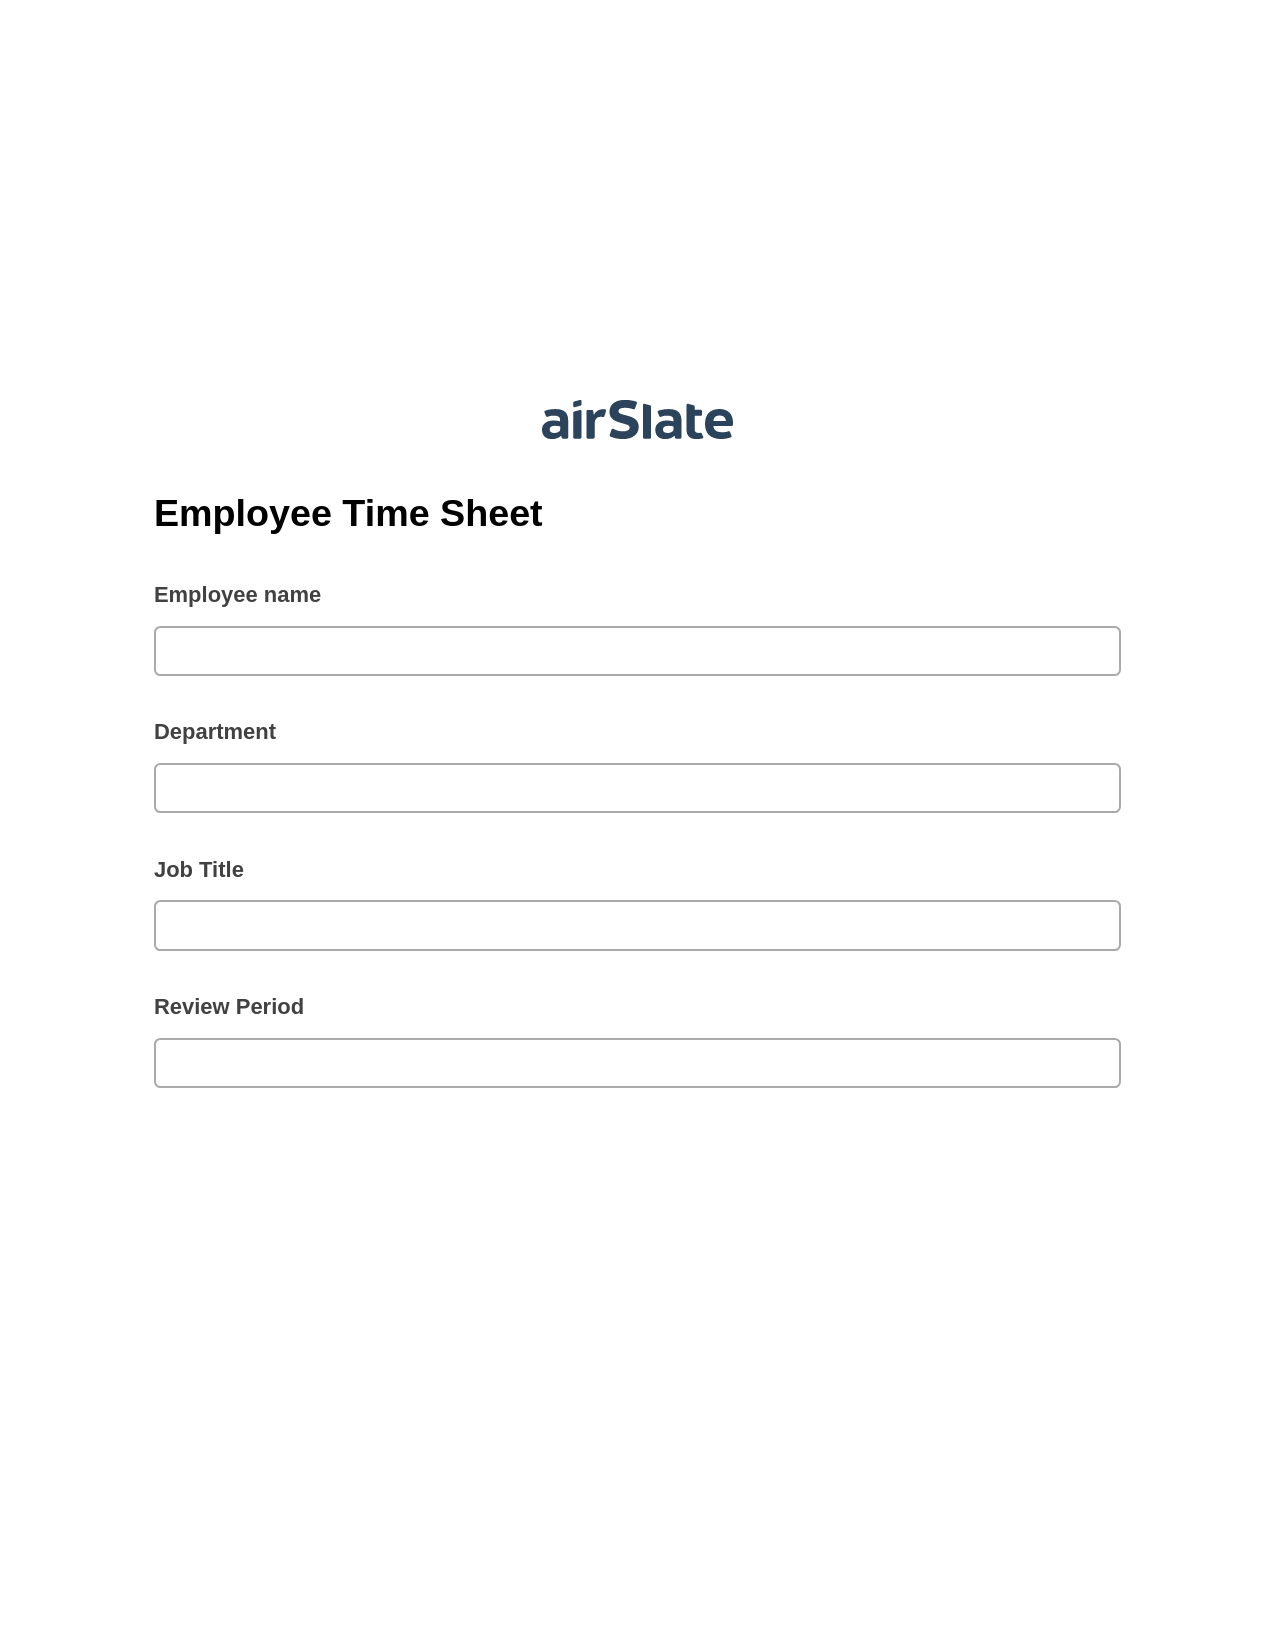 Employee Time Sheet Pre-fill from Litmos bot, Create slate addon, Archive to OneDrive Bot